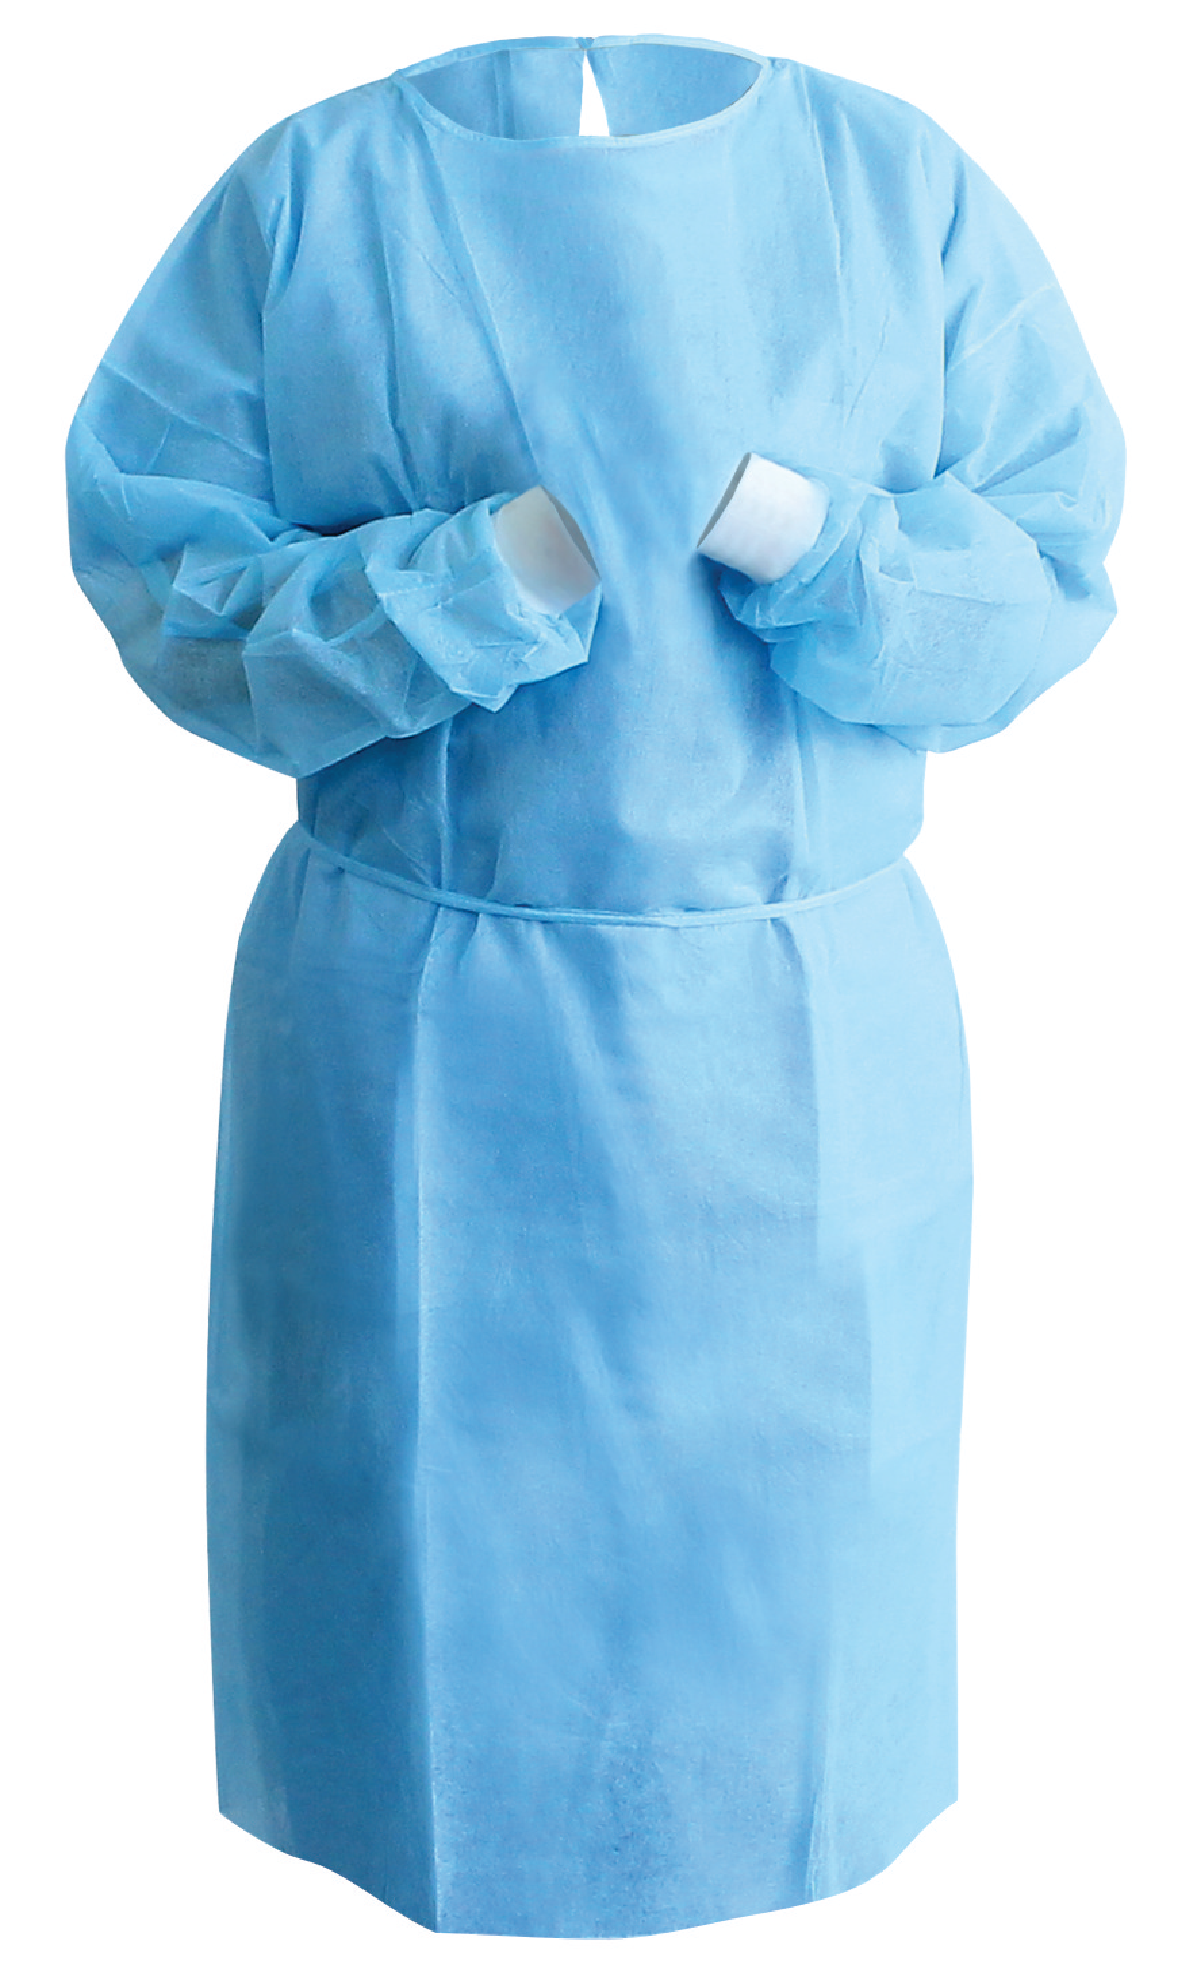 Disposable Polyethylene Medical Isolation Gowns